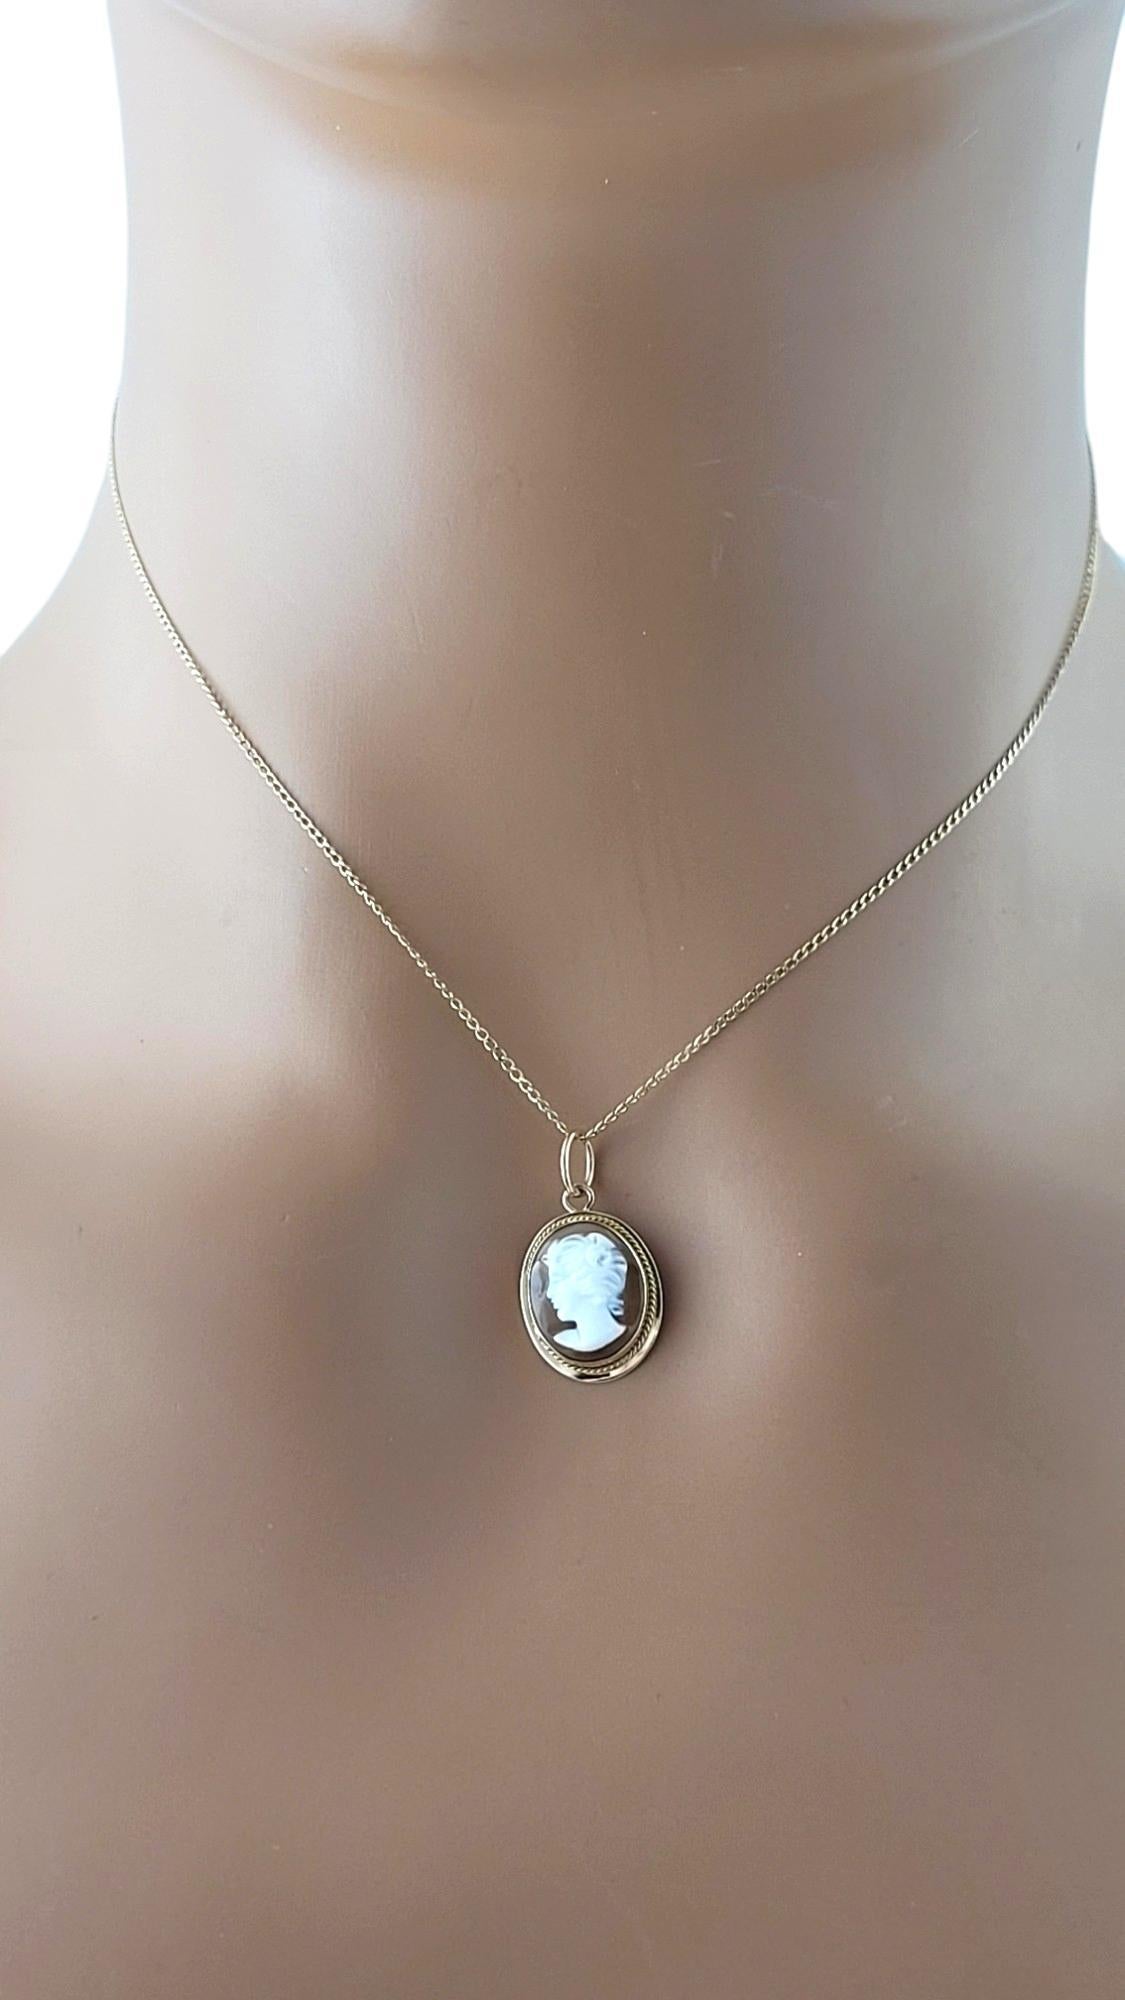 14K Yellow Gold Petite Cameo Pendant #16882 For Sale 2